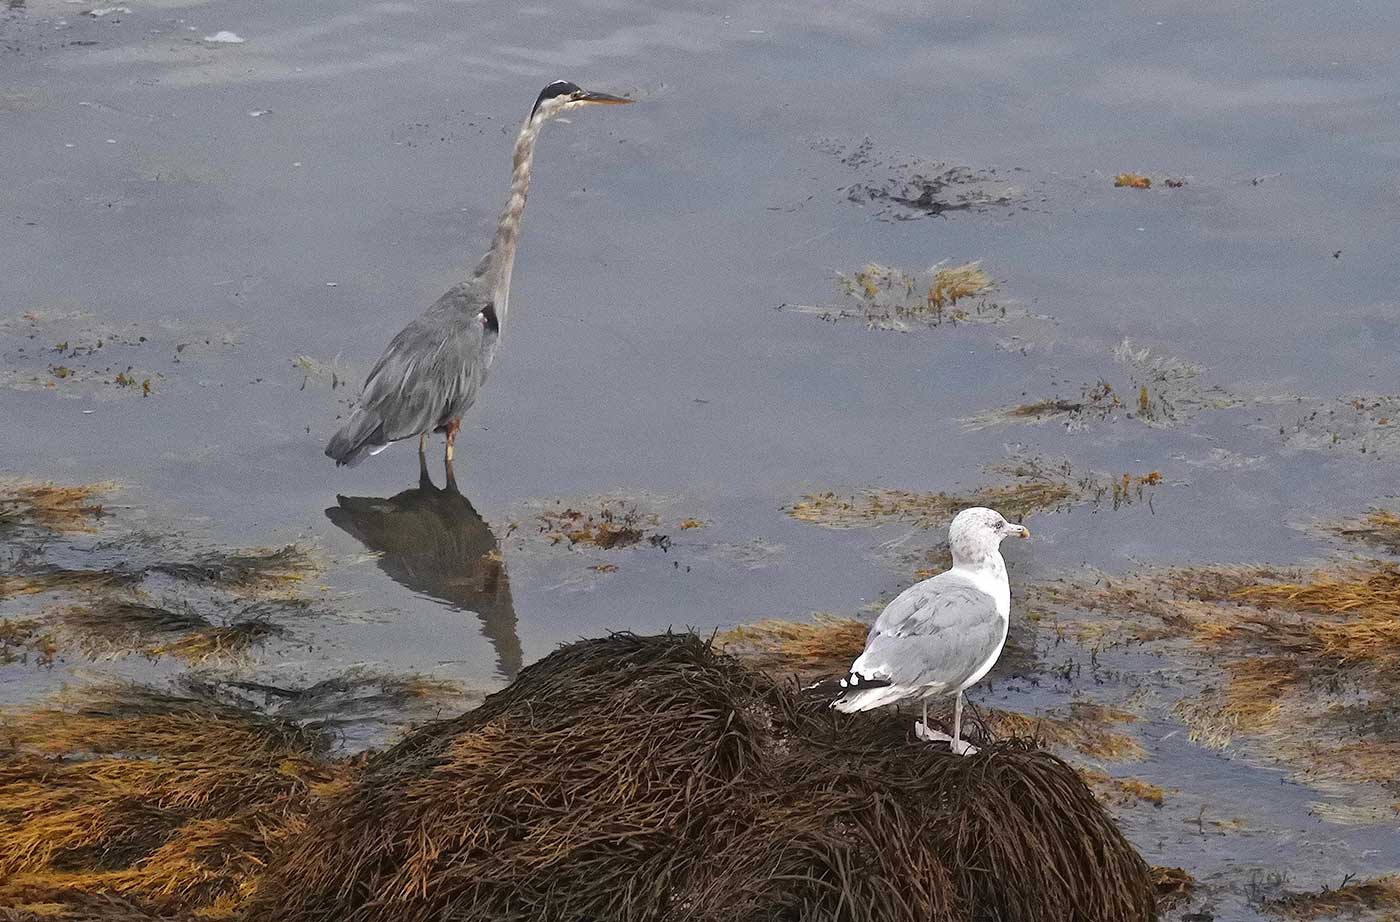 heron and gull perched on rocks and in water